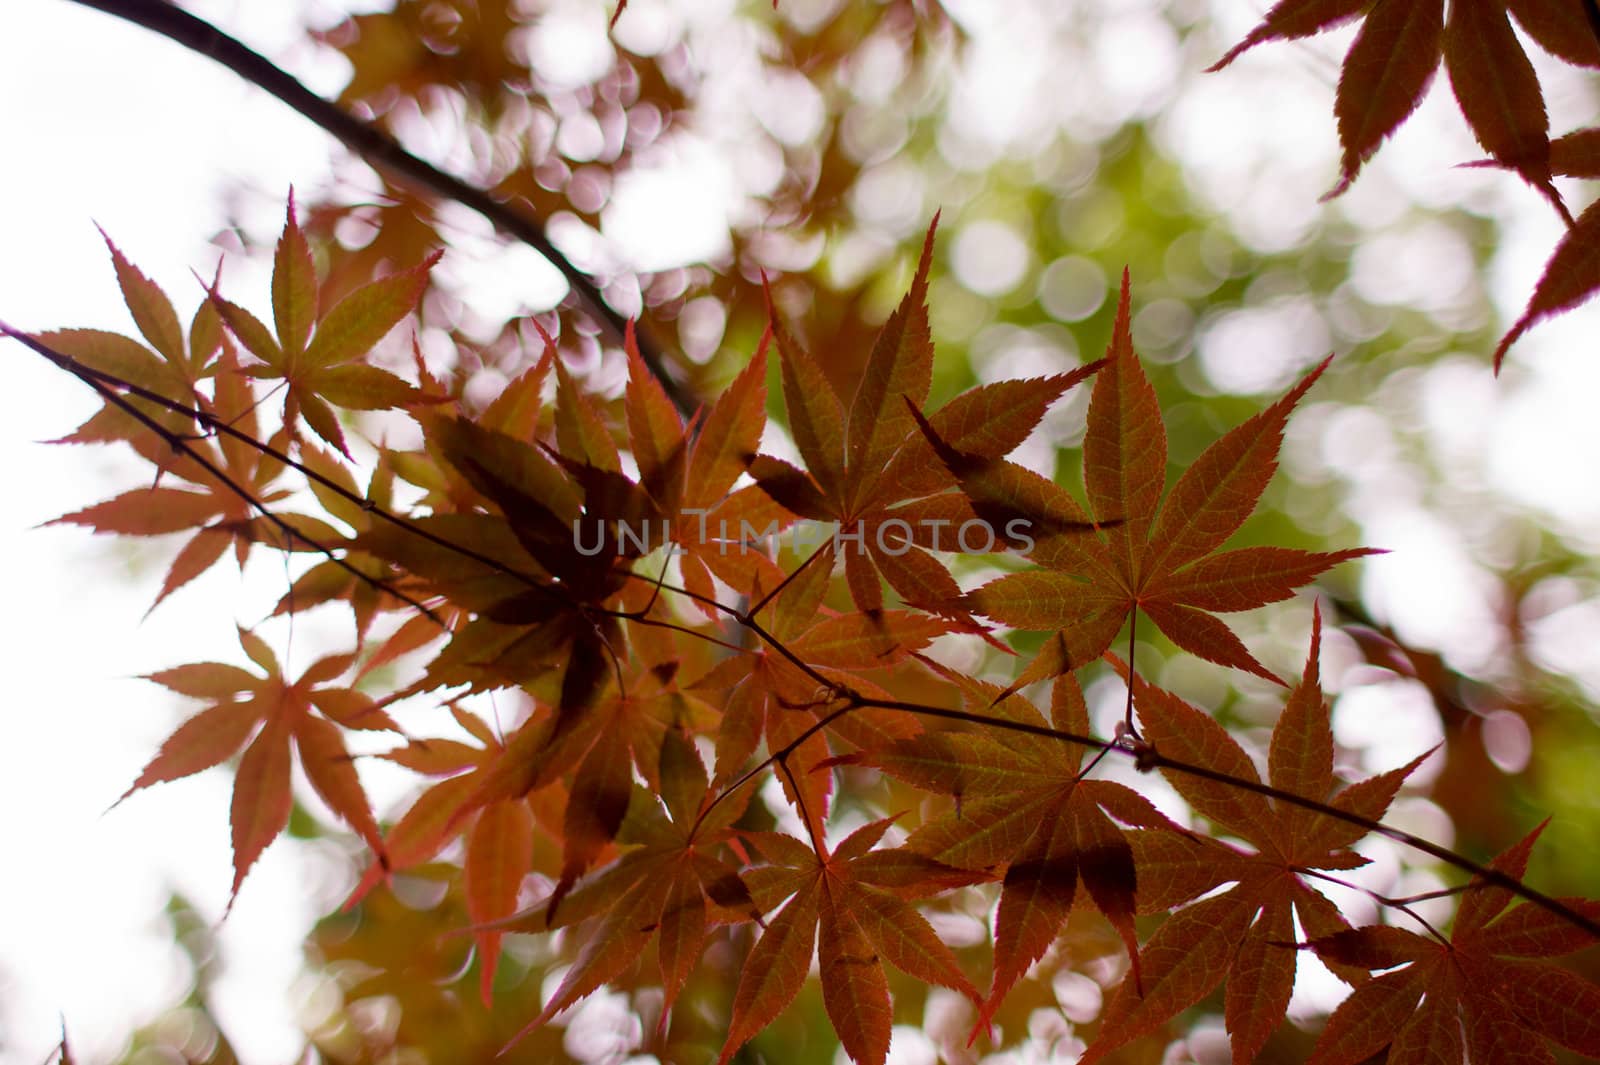 Japanese Maple Tree leaves silhouetted against soft focus green leaves